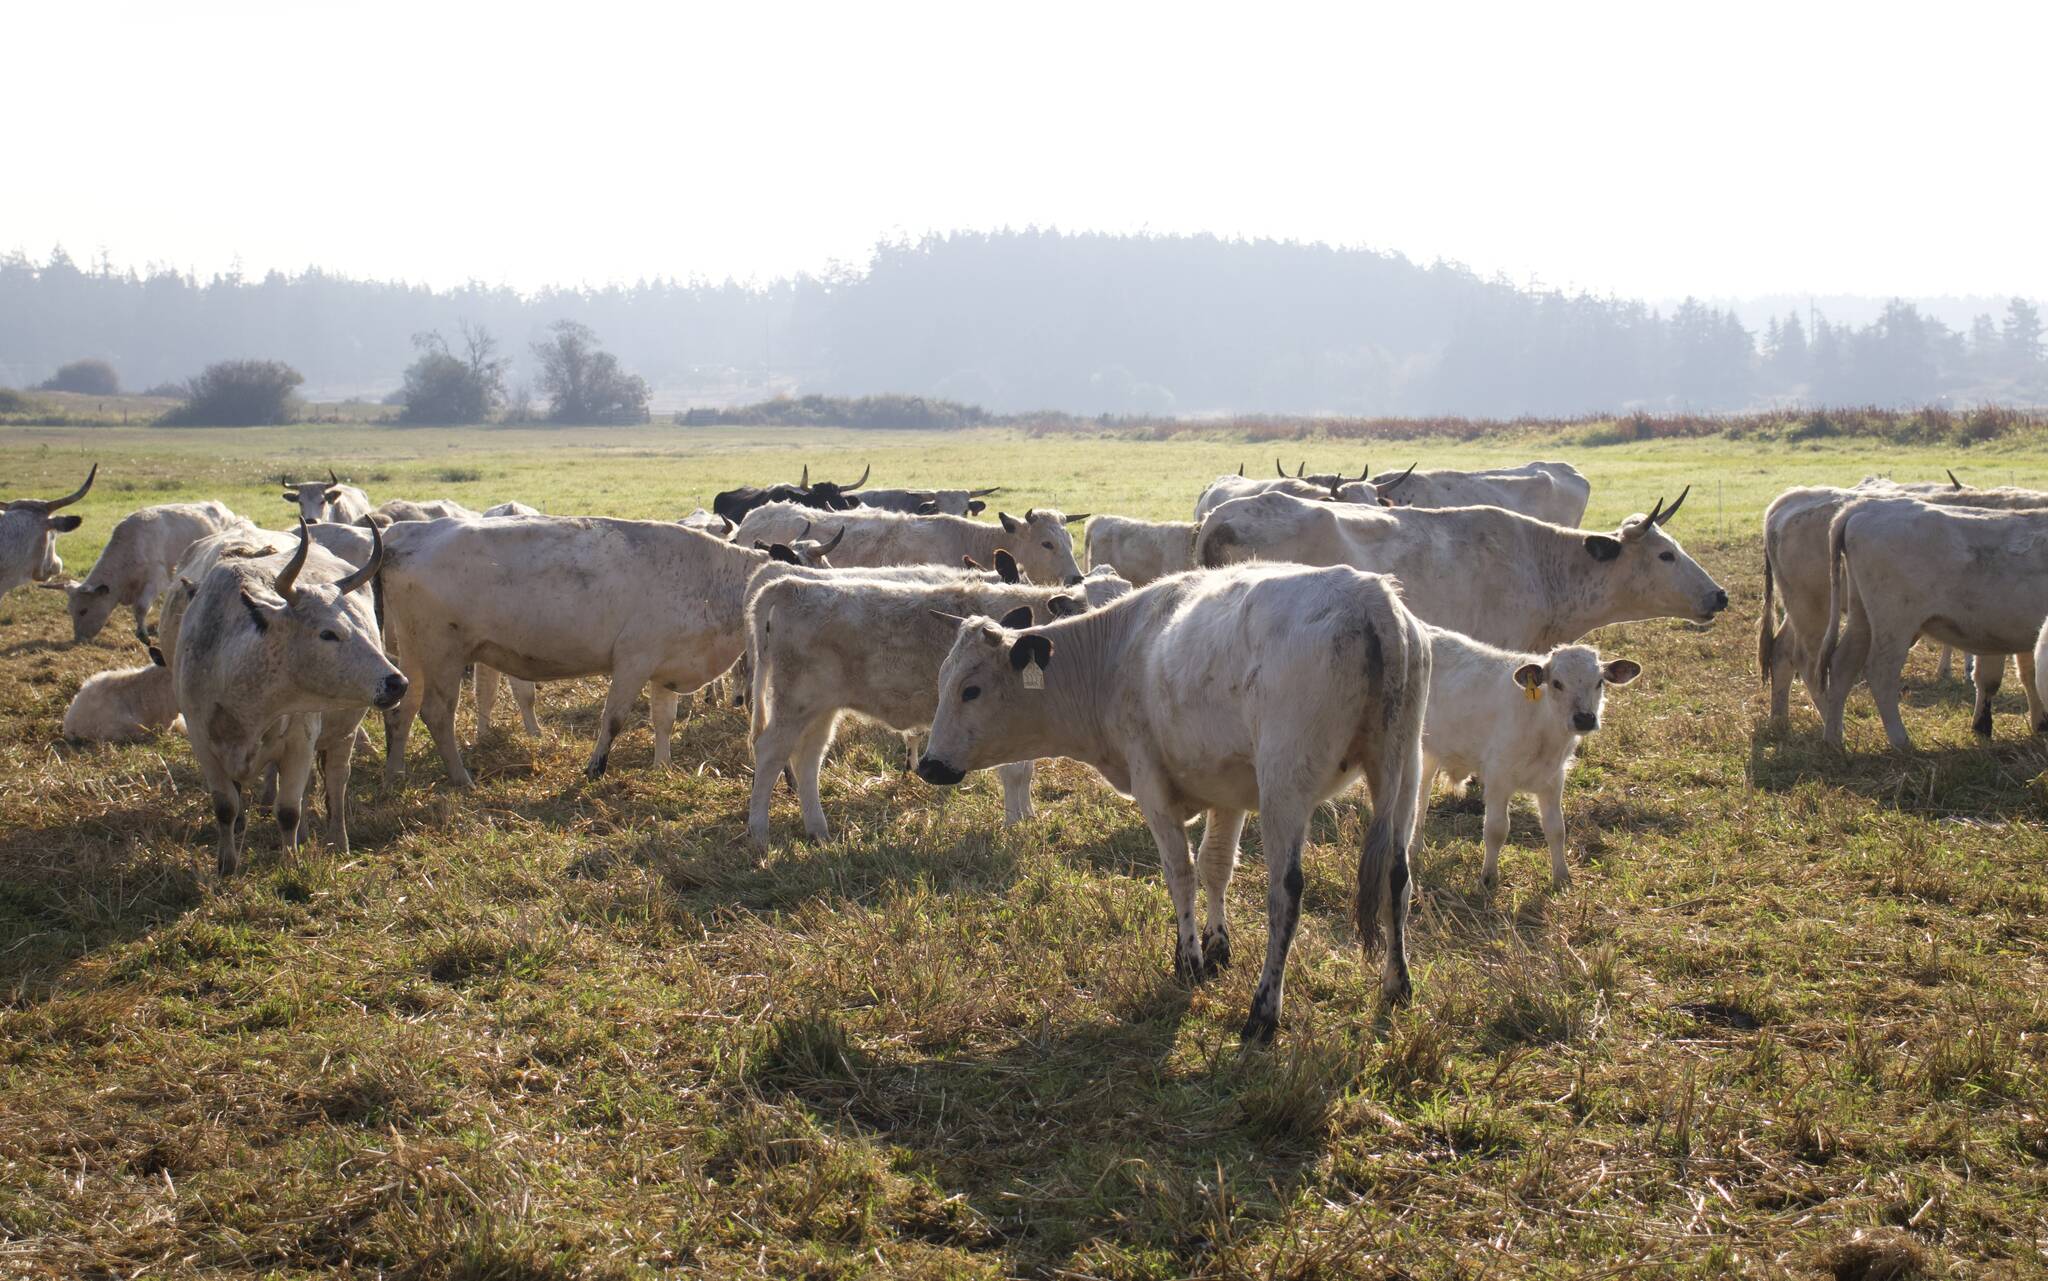 Photo by Rachel Rosen/Whidbey News-Times
Bell’s Farm has about 150 of the rare Ancient White Park Cattle; owner Kyle Flack estimates it is one of the biggest herds in North America.